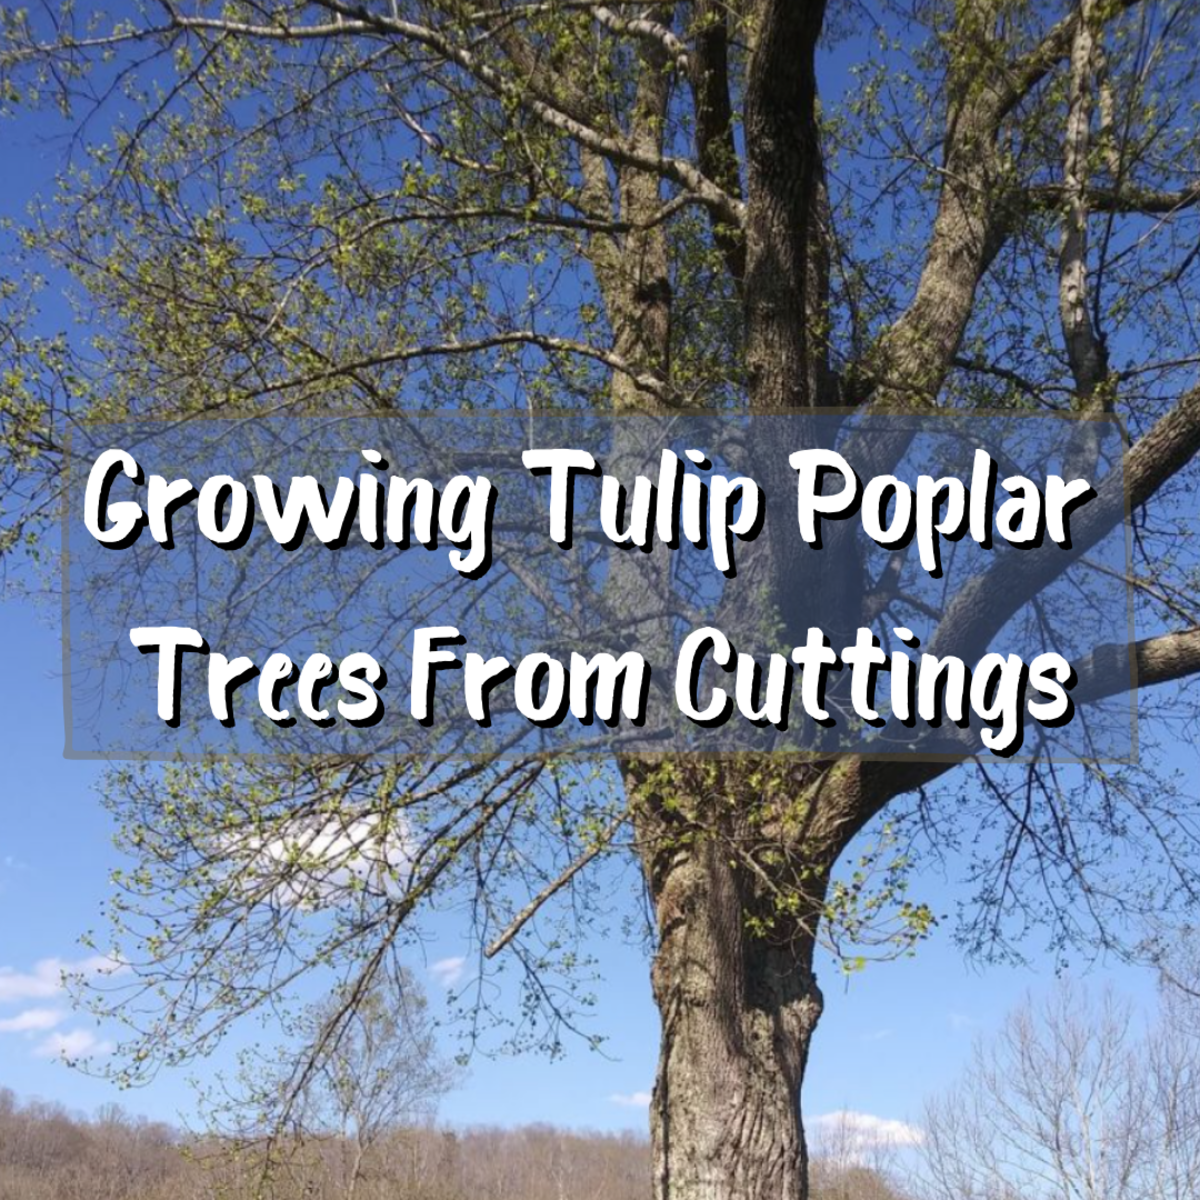 This article breaks down the process of growing a tulip poplar tree from cuttings.